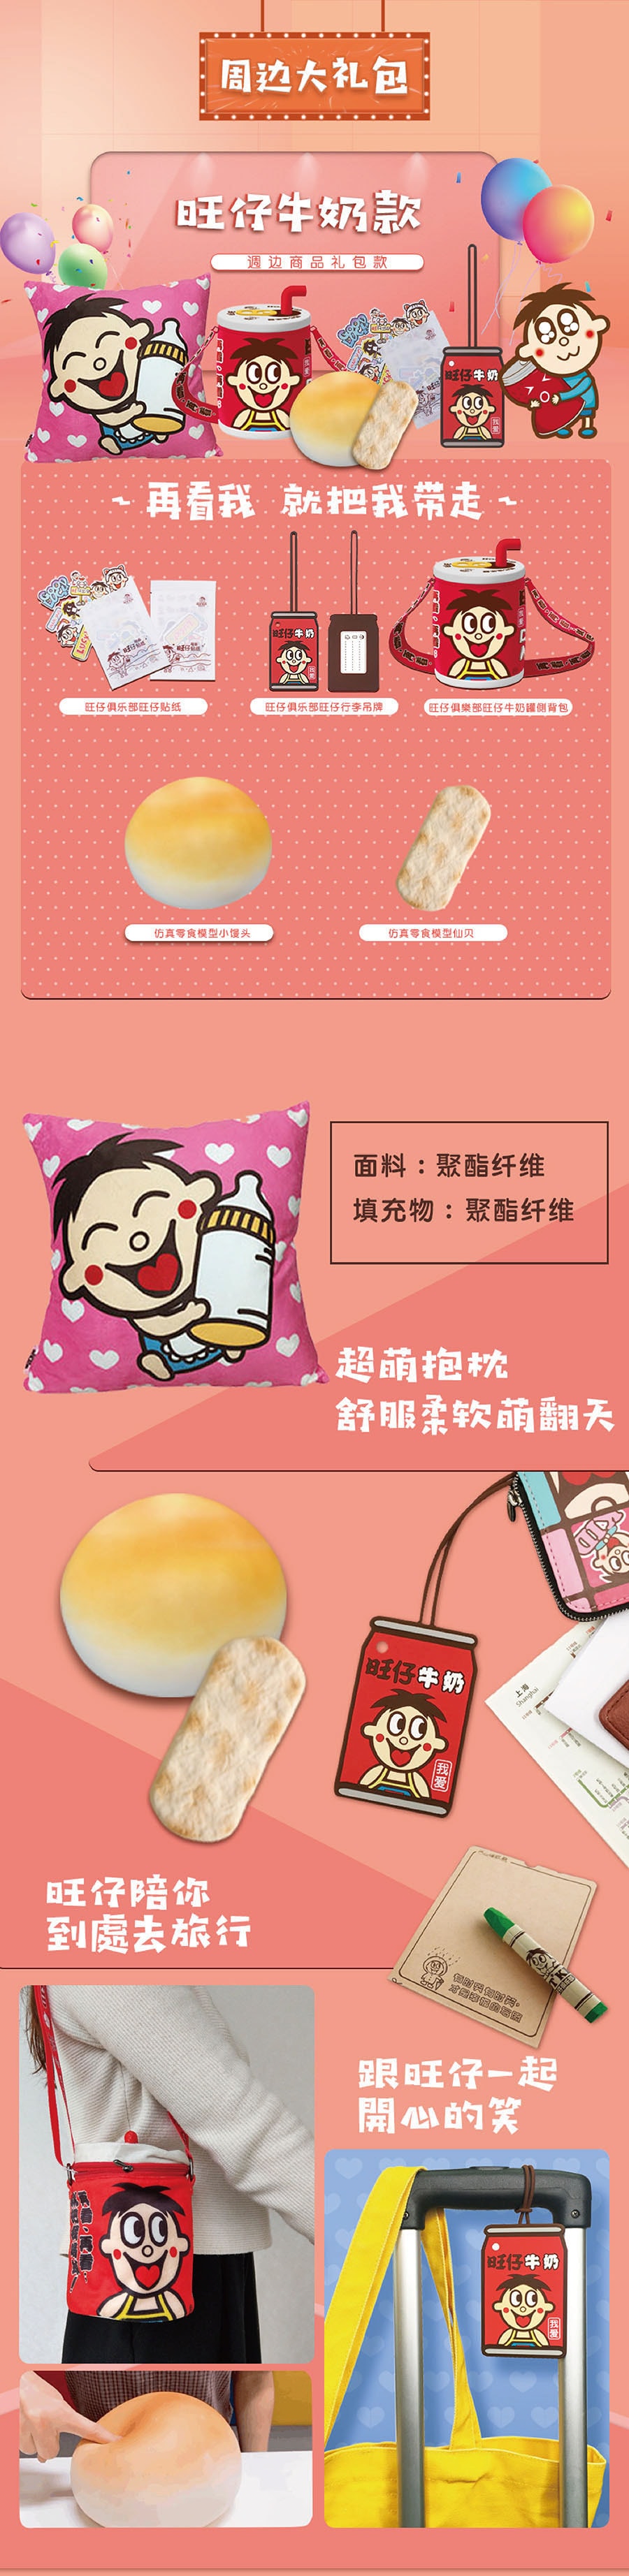 Taiwan Hot Kids Merchandise Bundle - Luggage Tag/Stickers/Shoulder Bag/Baby Pink Pillow/Relax Toy